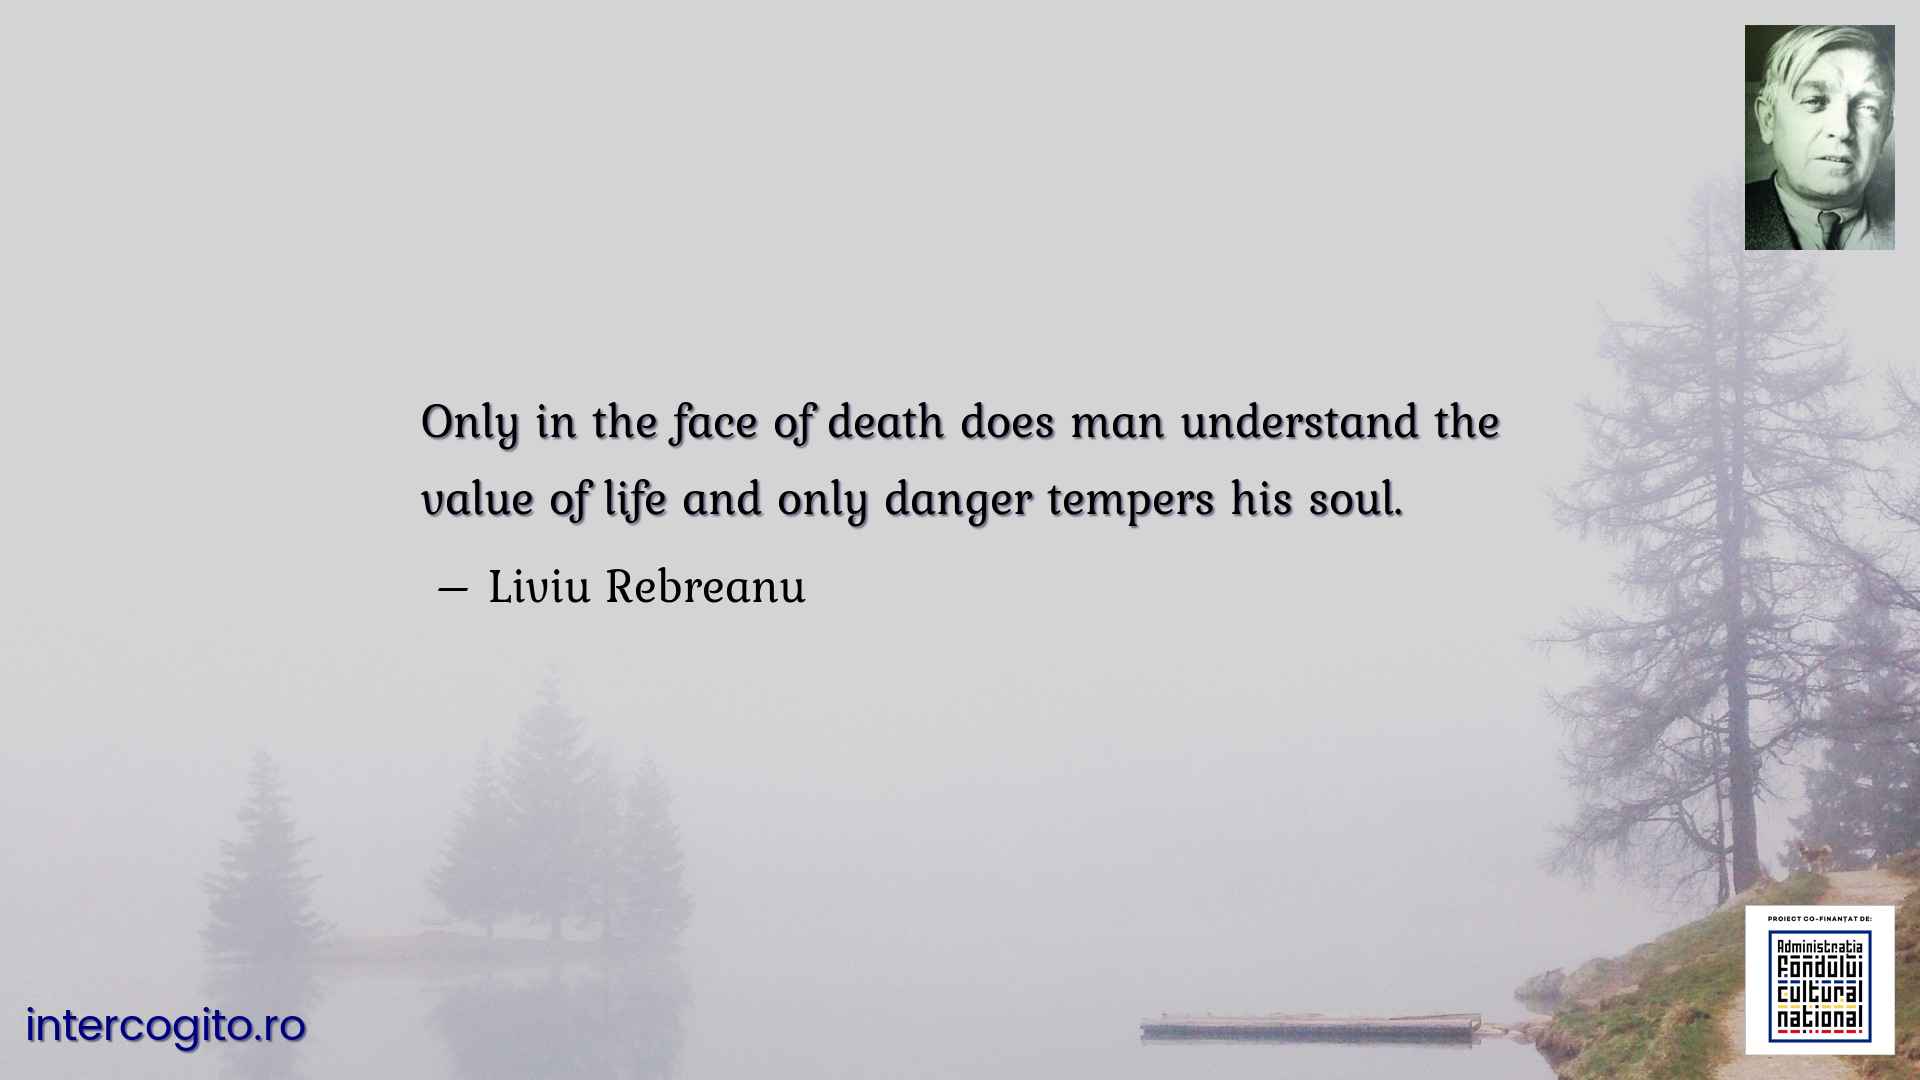 Only in the face of death does man understand the value of life and only danger tempers his soul.